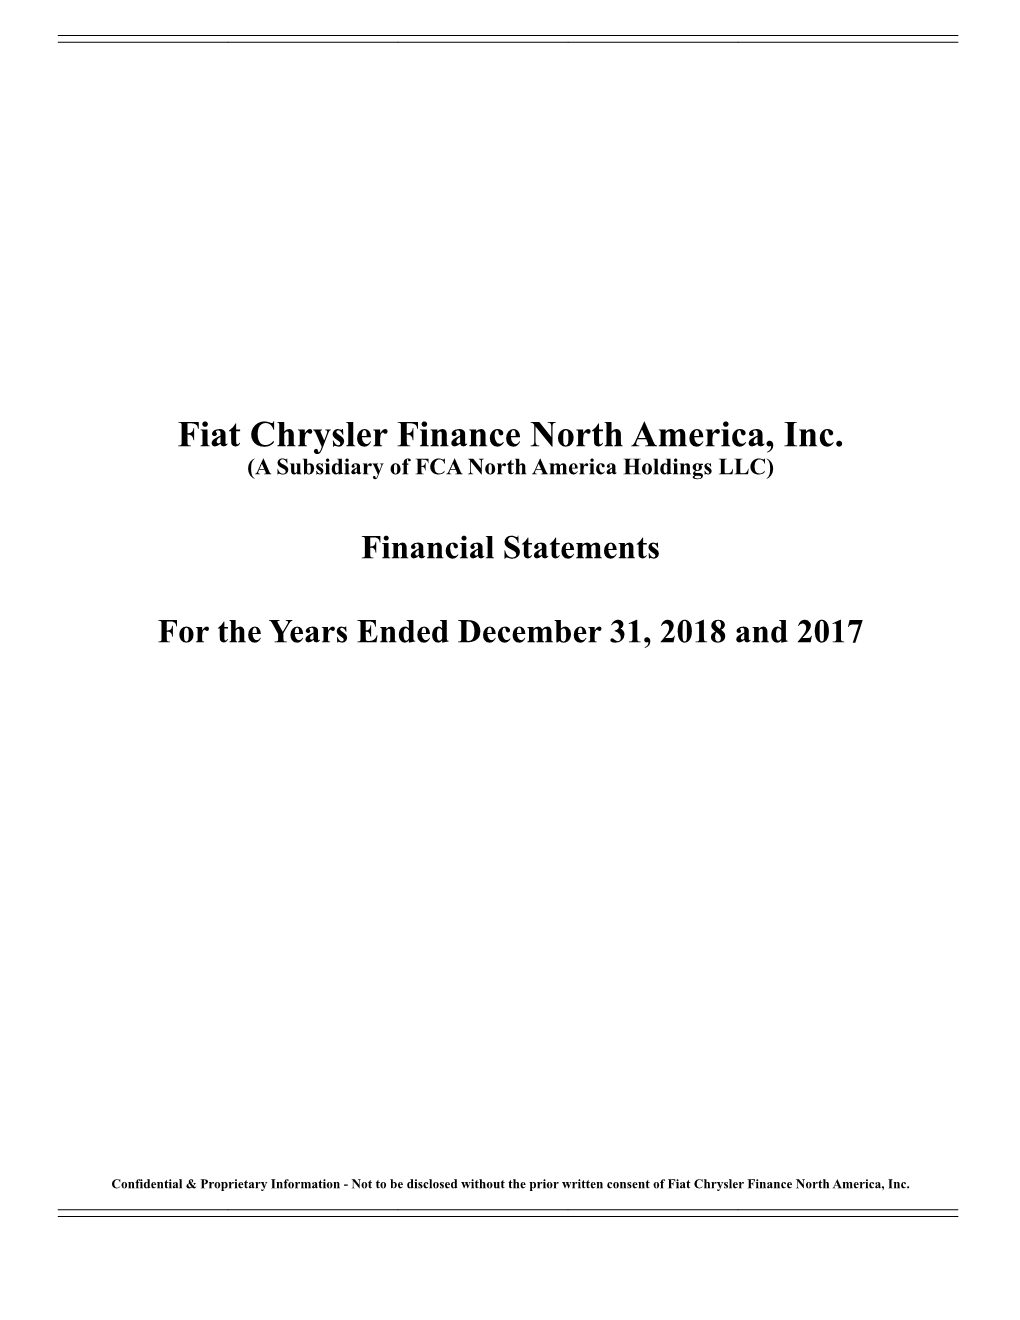 Fiat Chrysler Finance North America, Inc. (A Subsidiary of FCA North America Holdings LLC)